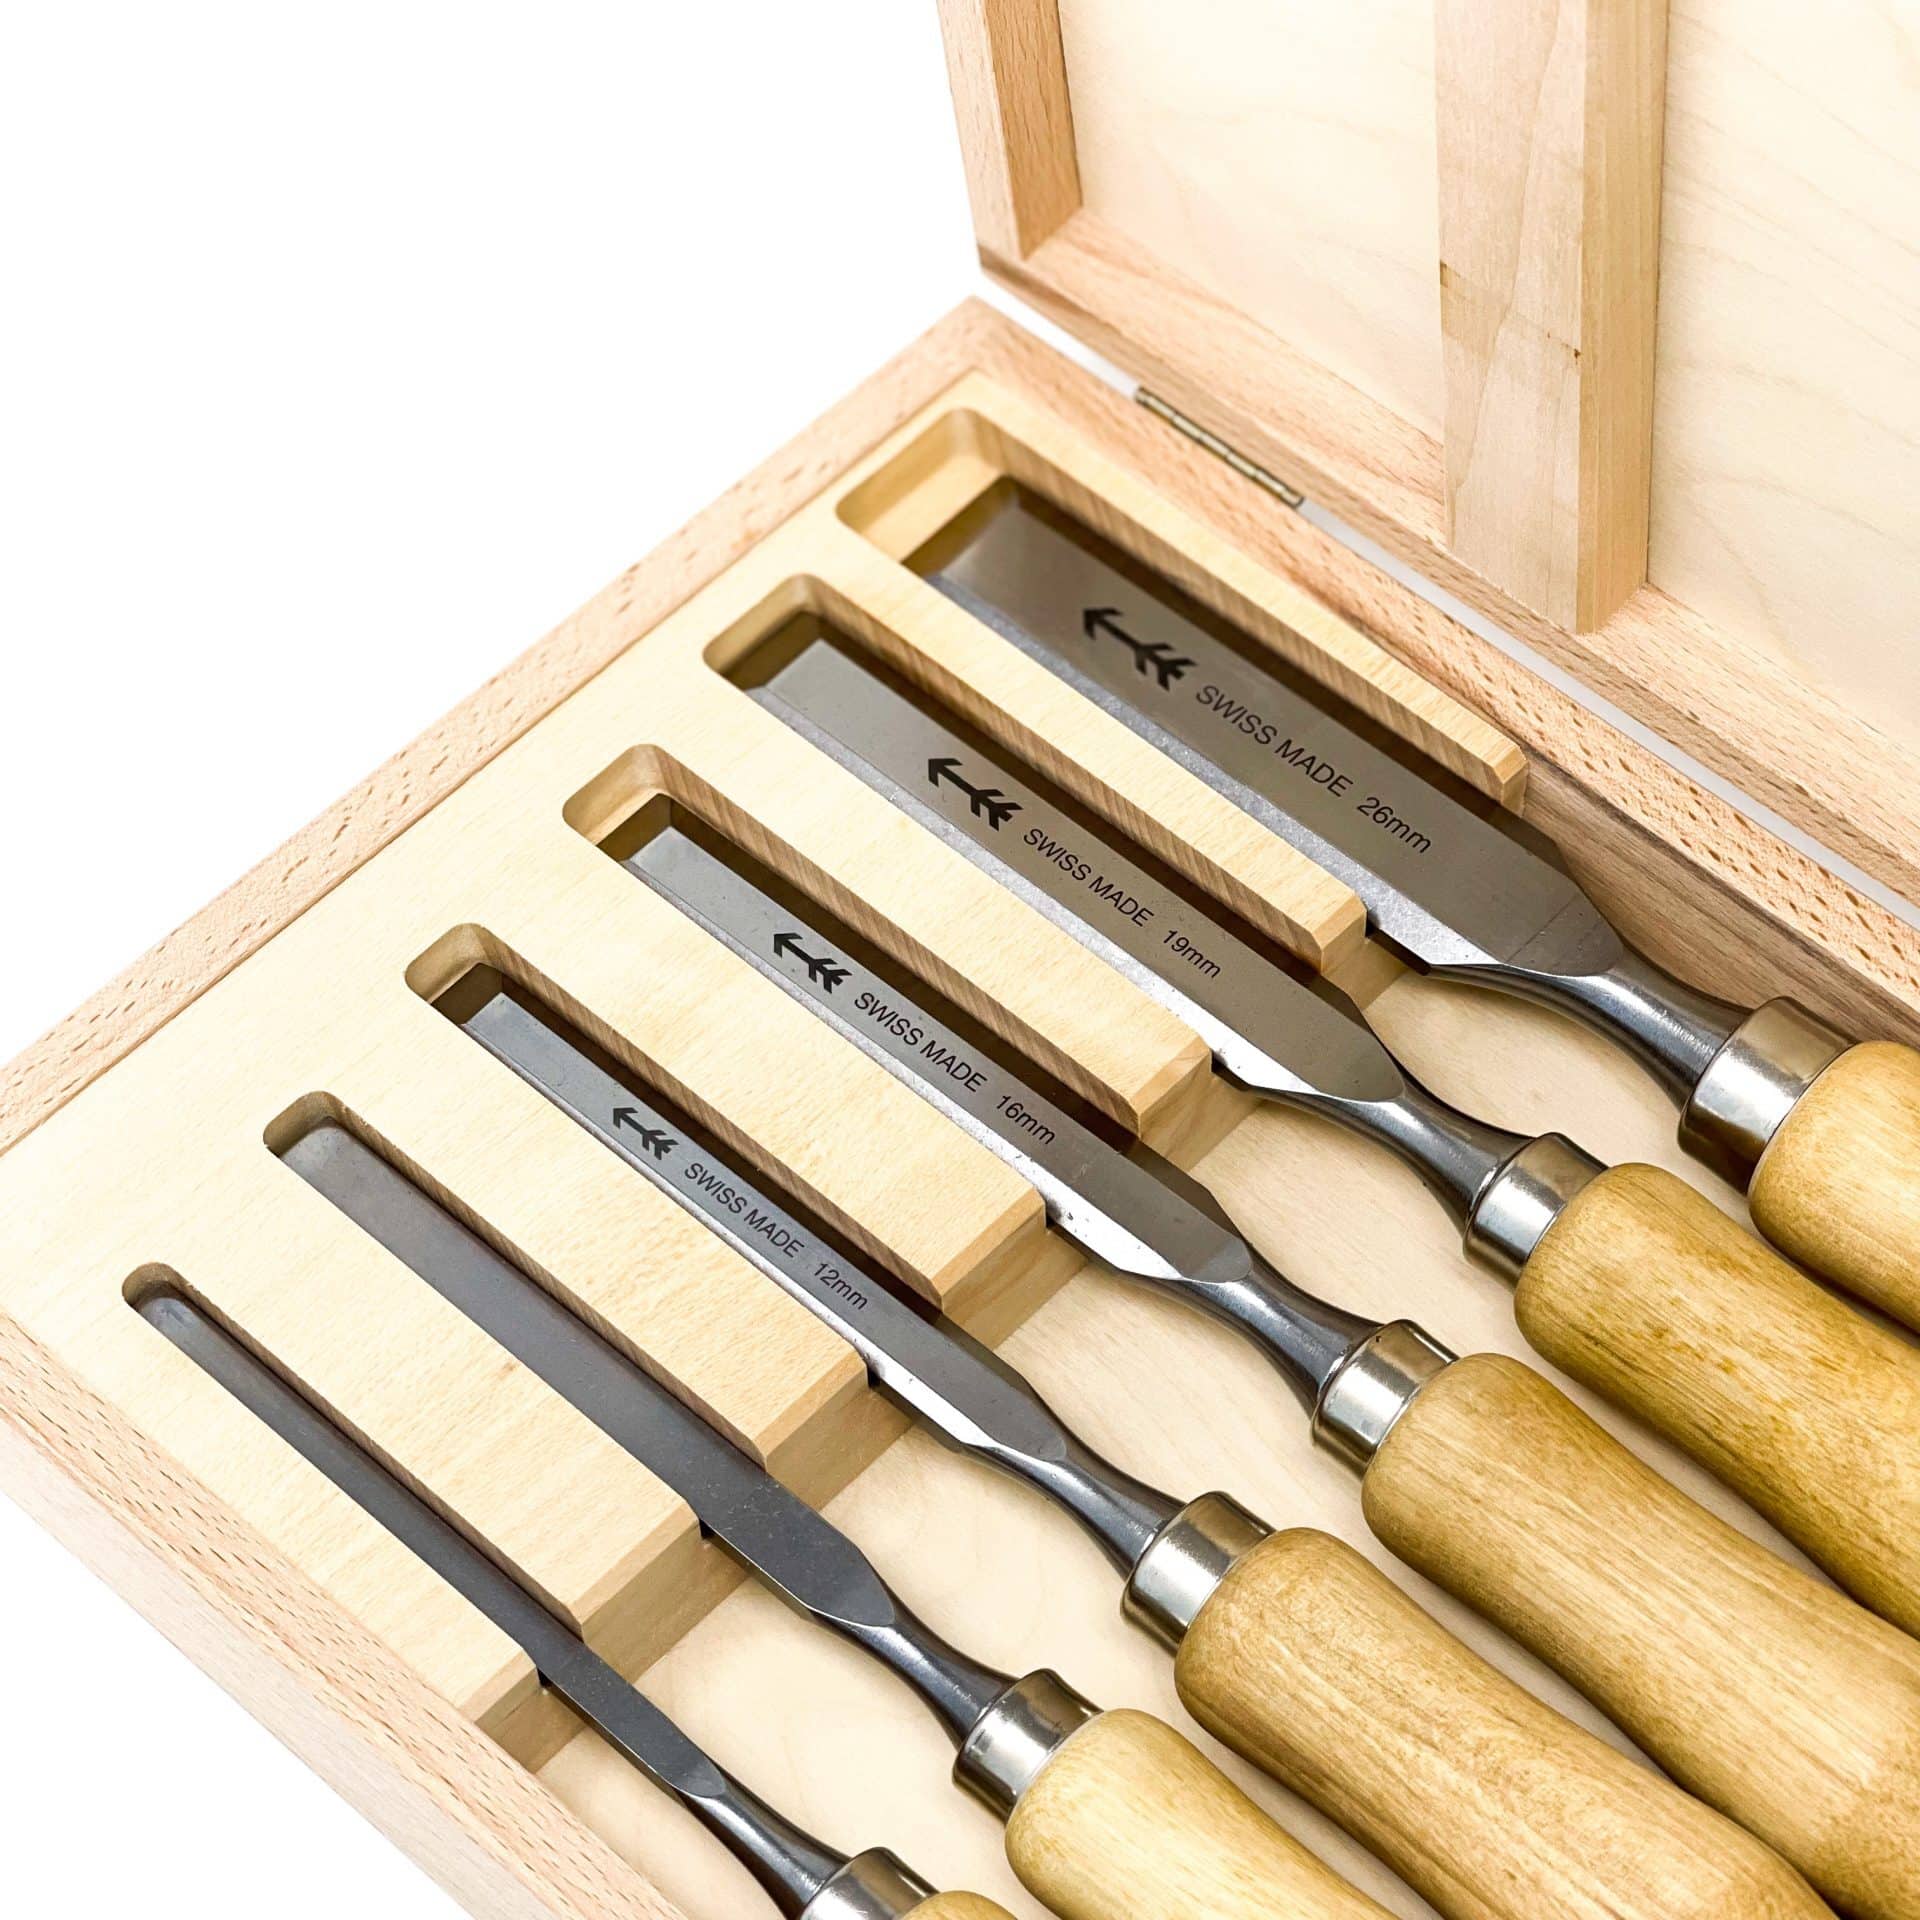 Pfeil Chisels and Swiss Carving Tool Sets - Log Home Building